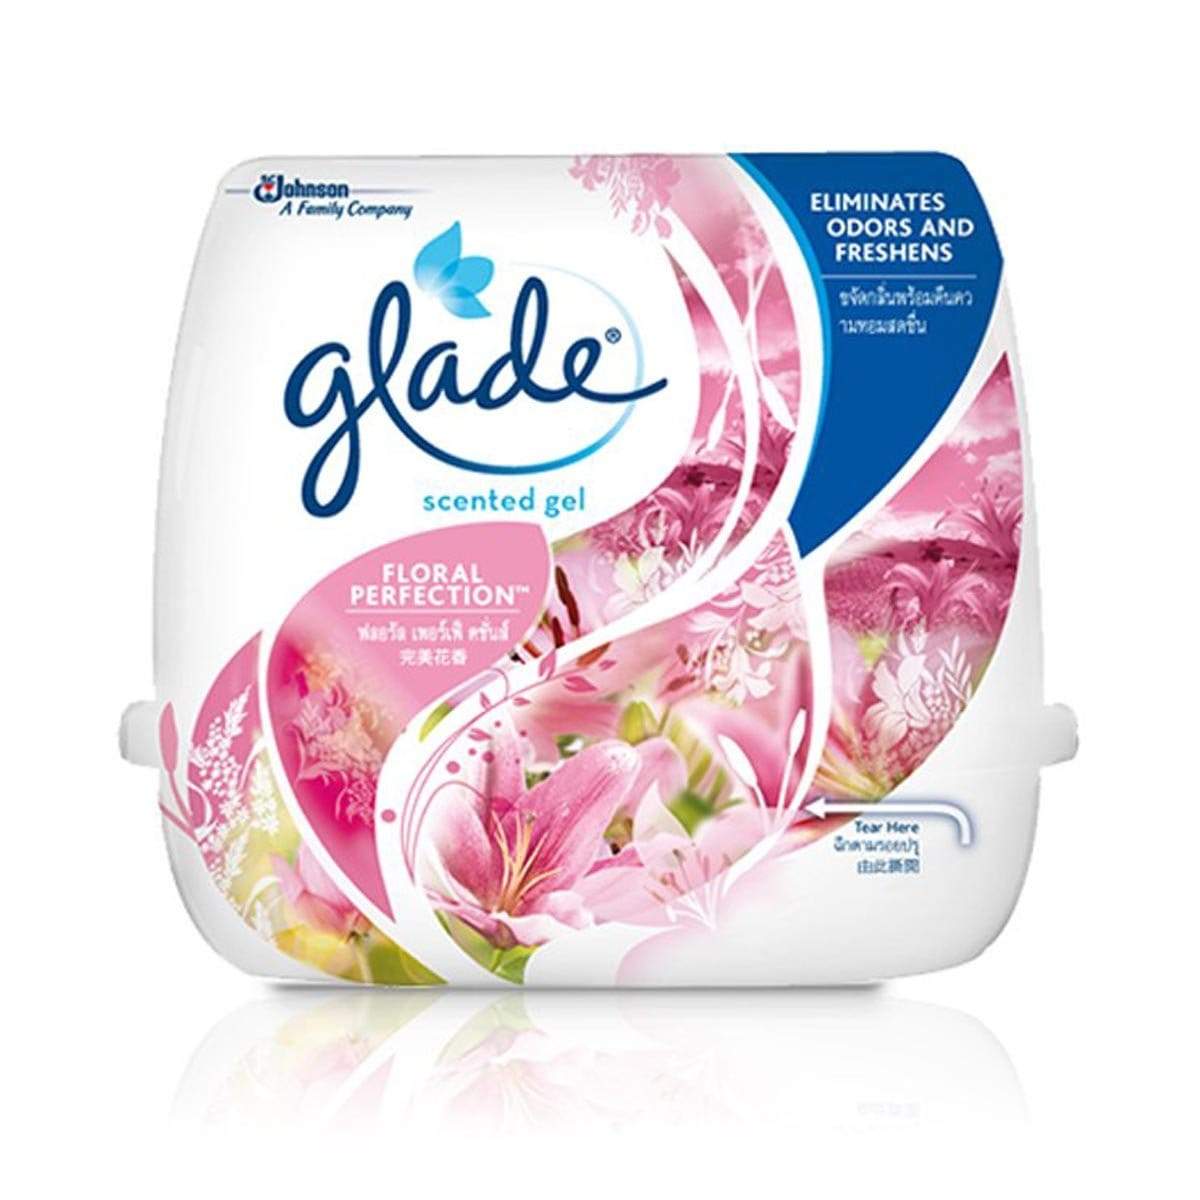 Glade Scented Gel Floral Perfection Air Freshener 180g